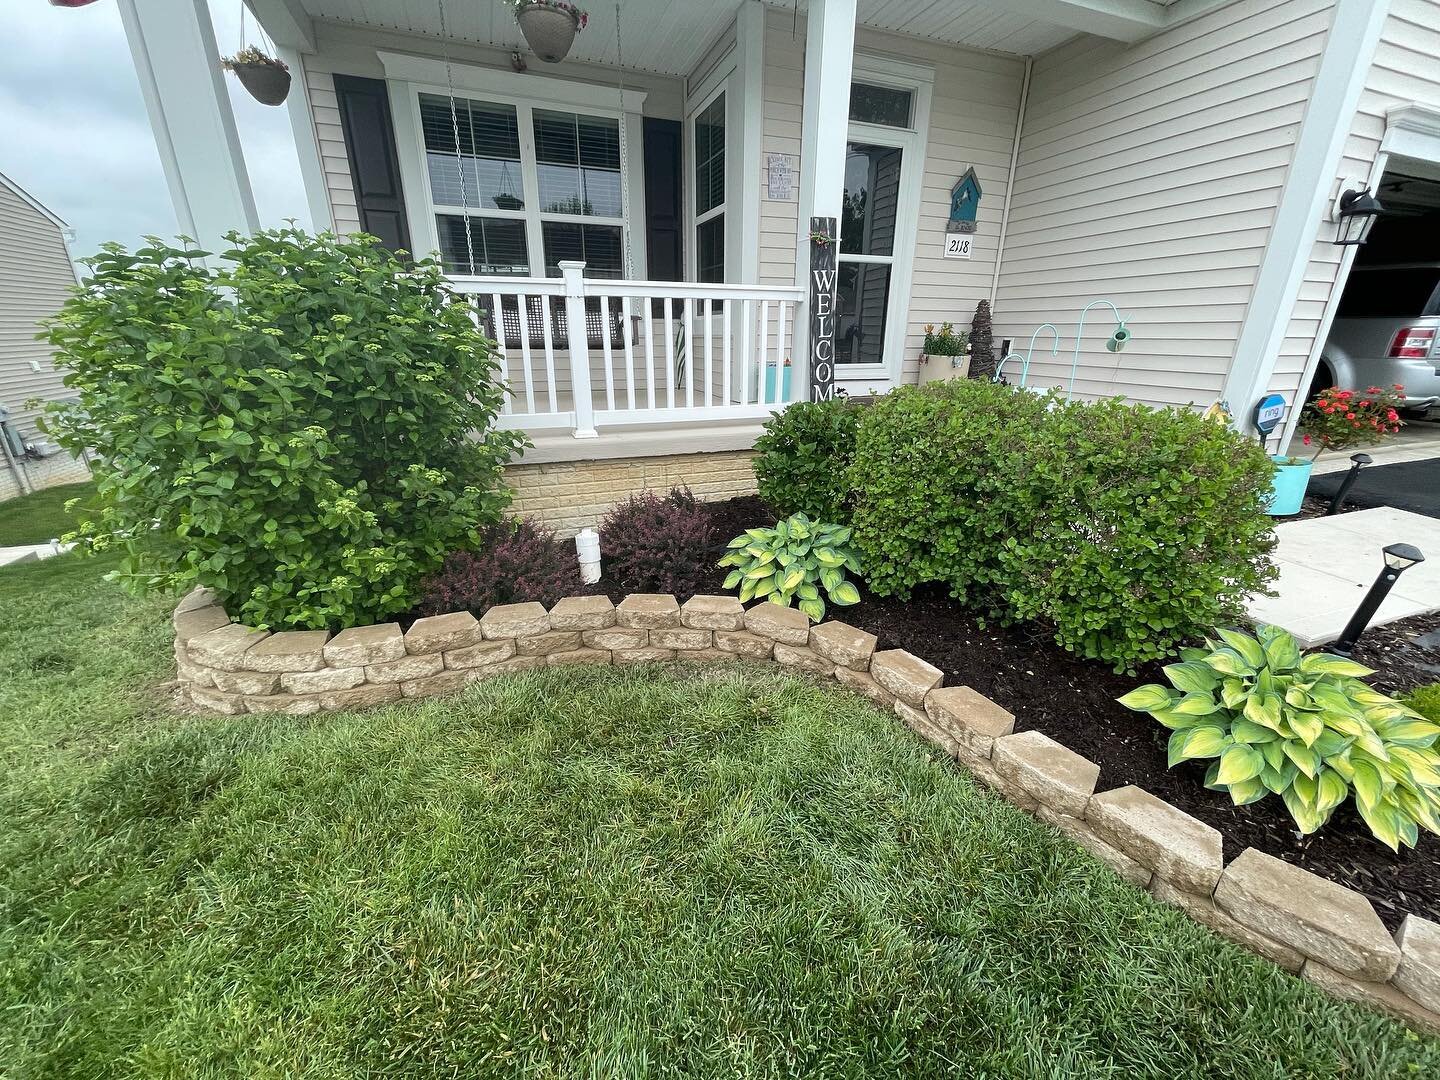 From May when we did our first ever paver flowerbed. Made sure we did it right for drainage. I have to say, it is probably my favorite landscaping job we did over the summer. Excited to start doing more jobs like this next season! #landscaper #landsc